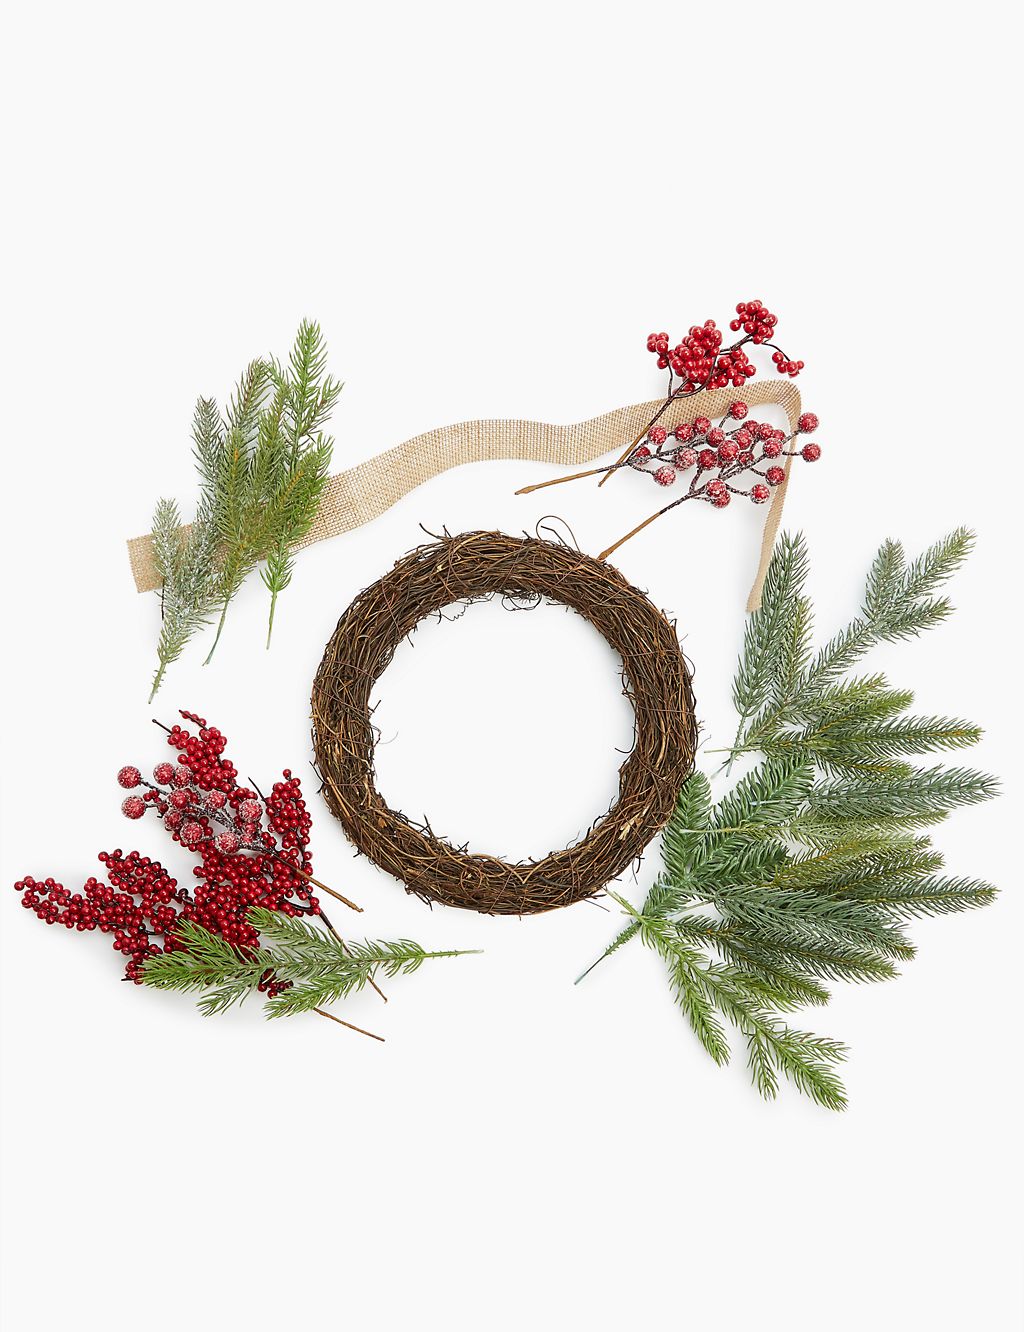 Make Your Own Wreath 1 of 4